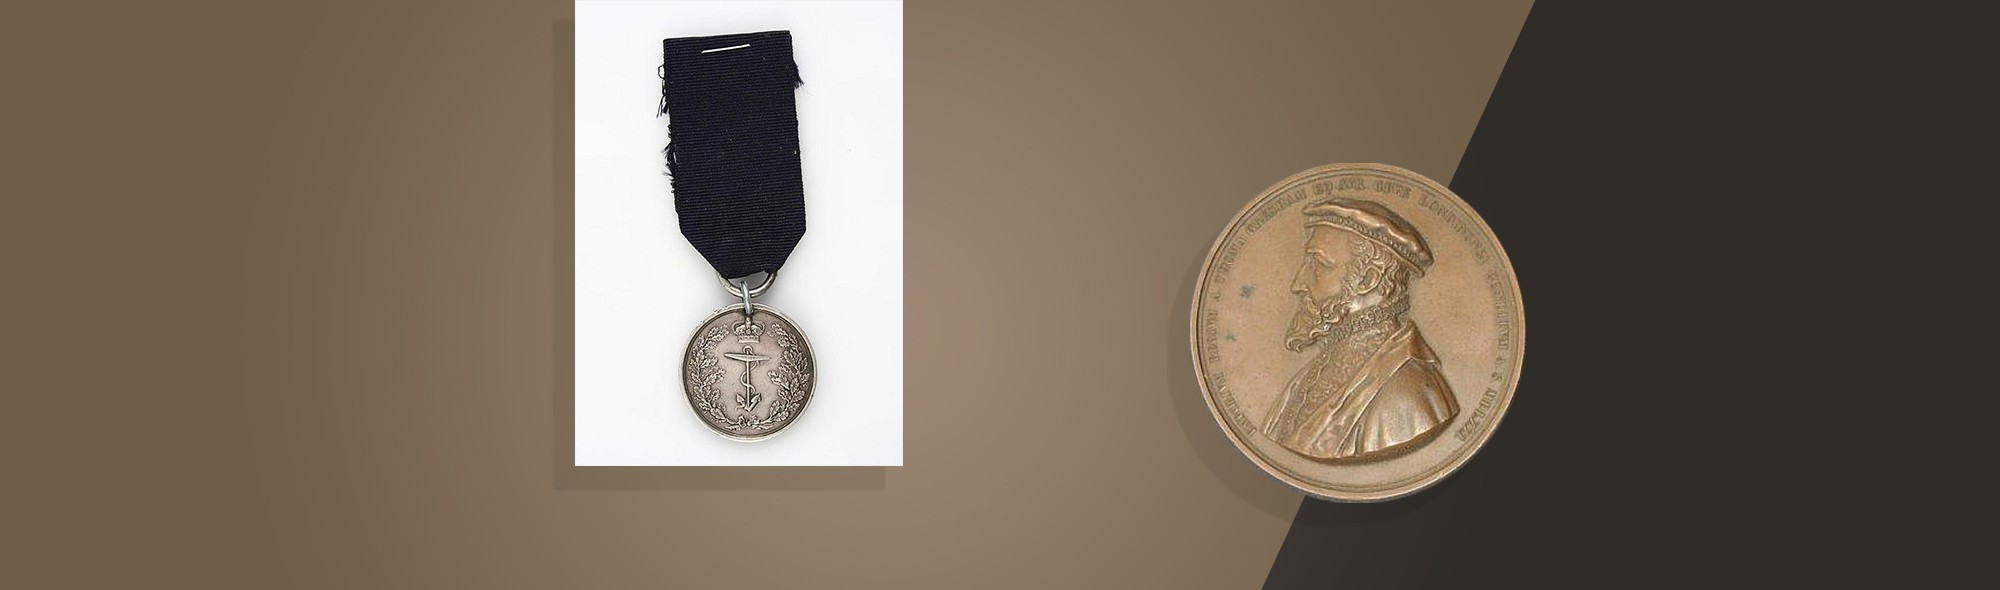 silver medal and coin